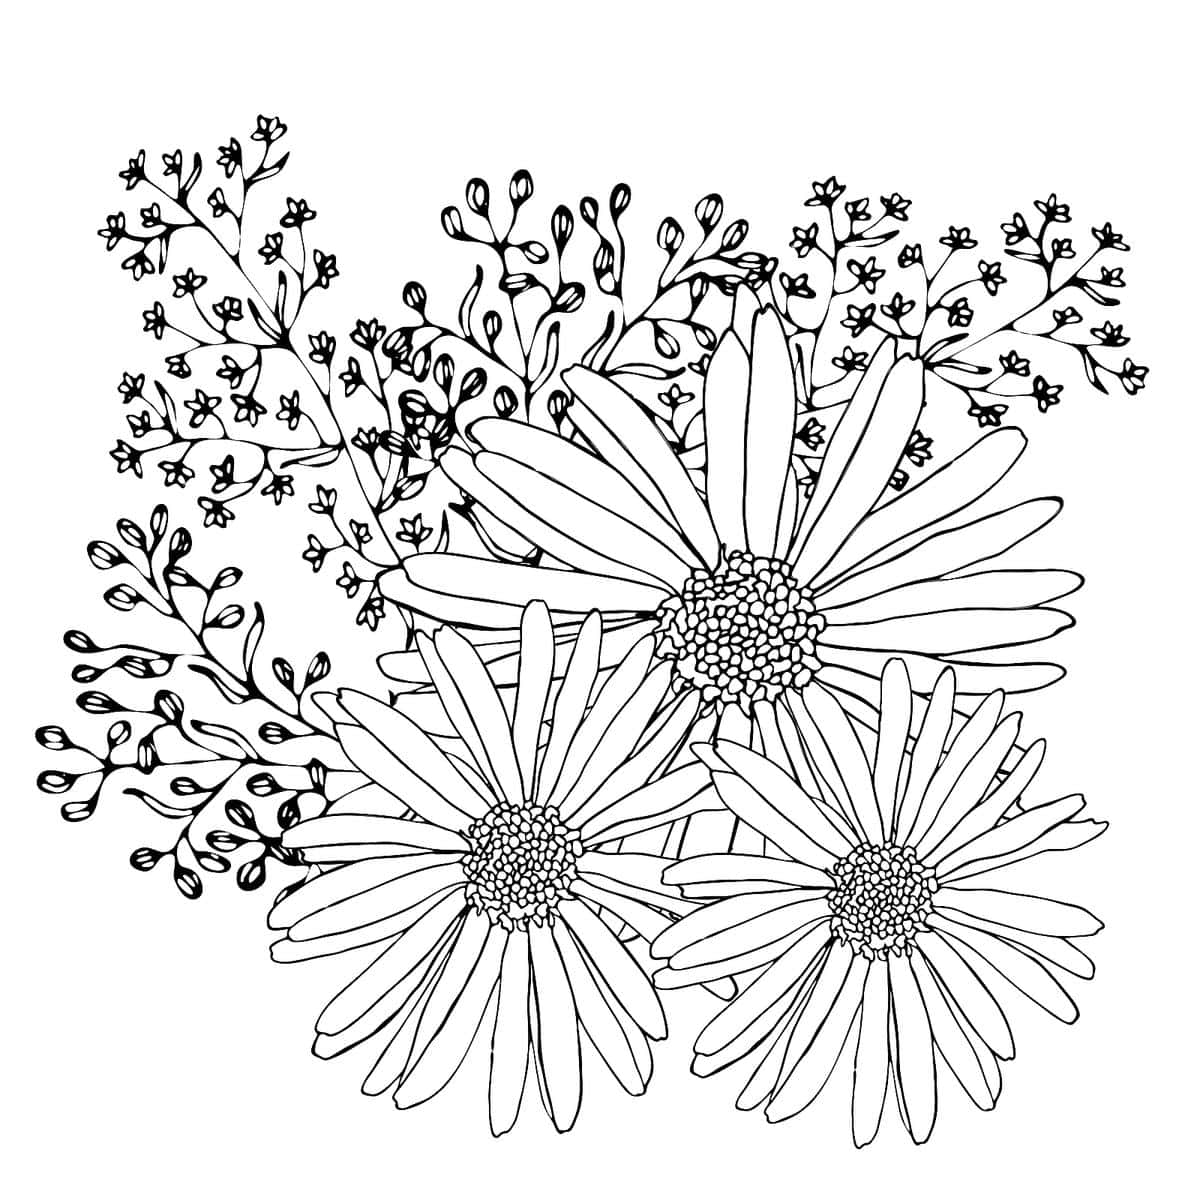 A Black And White Drawing Of Flowers And Leaves